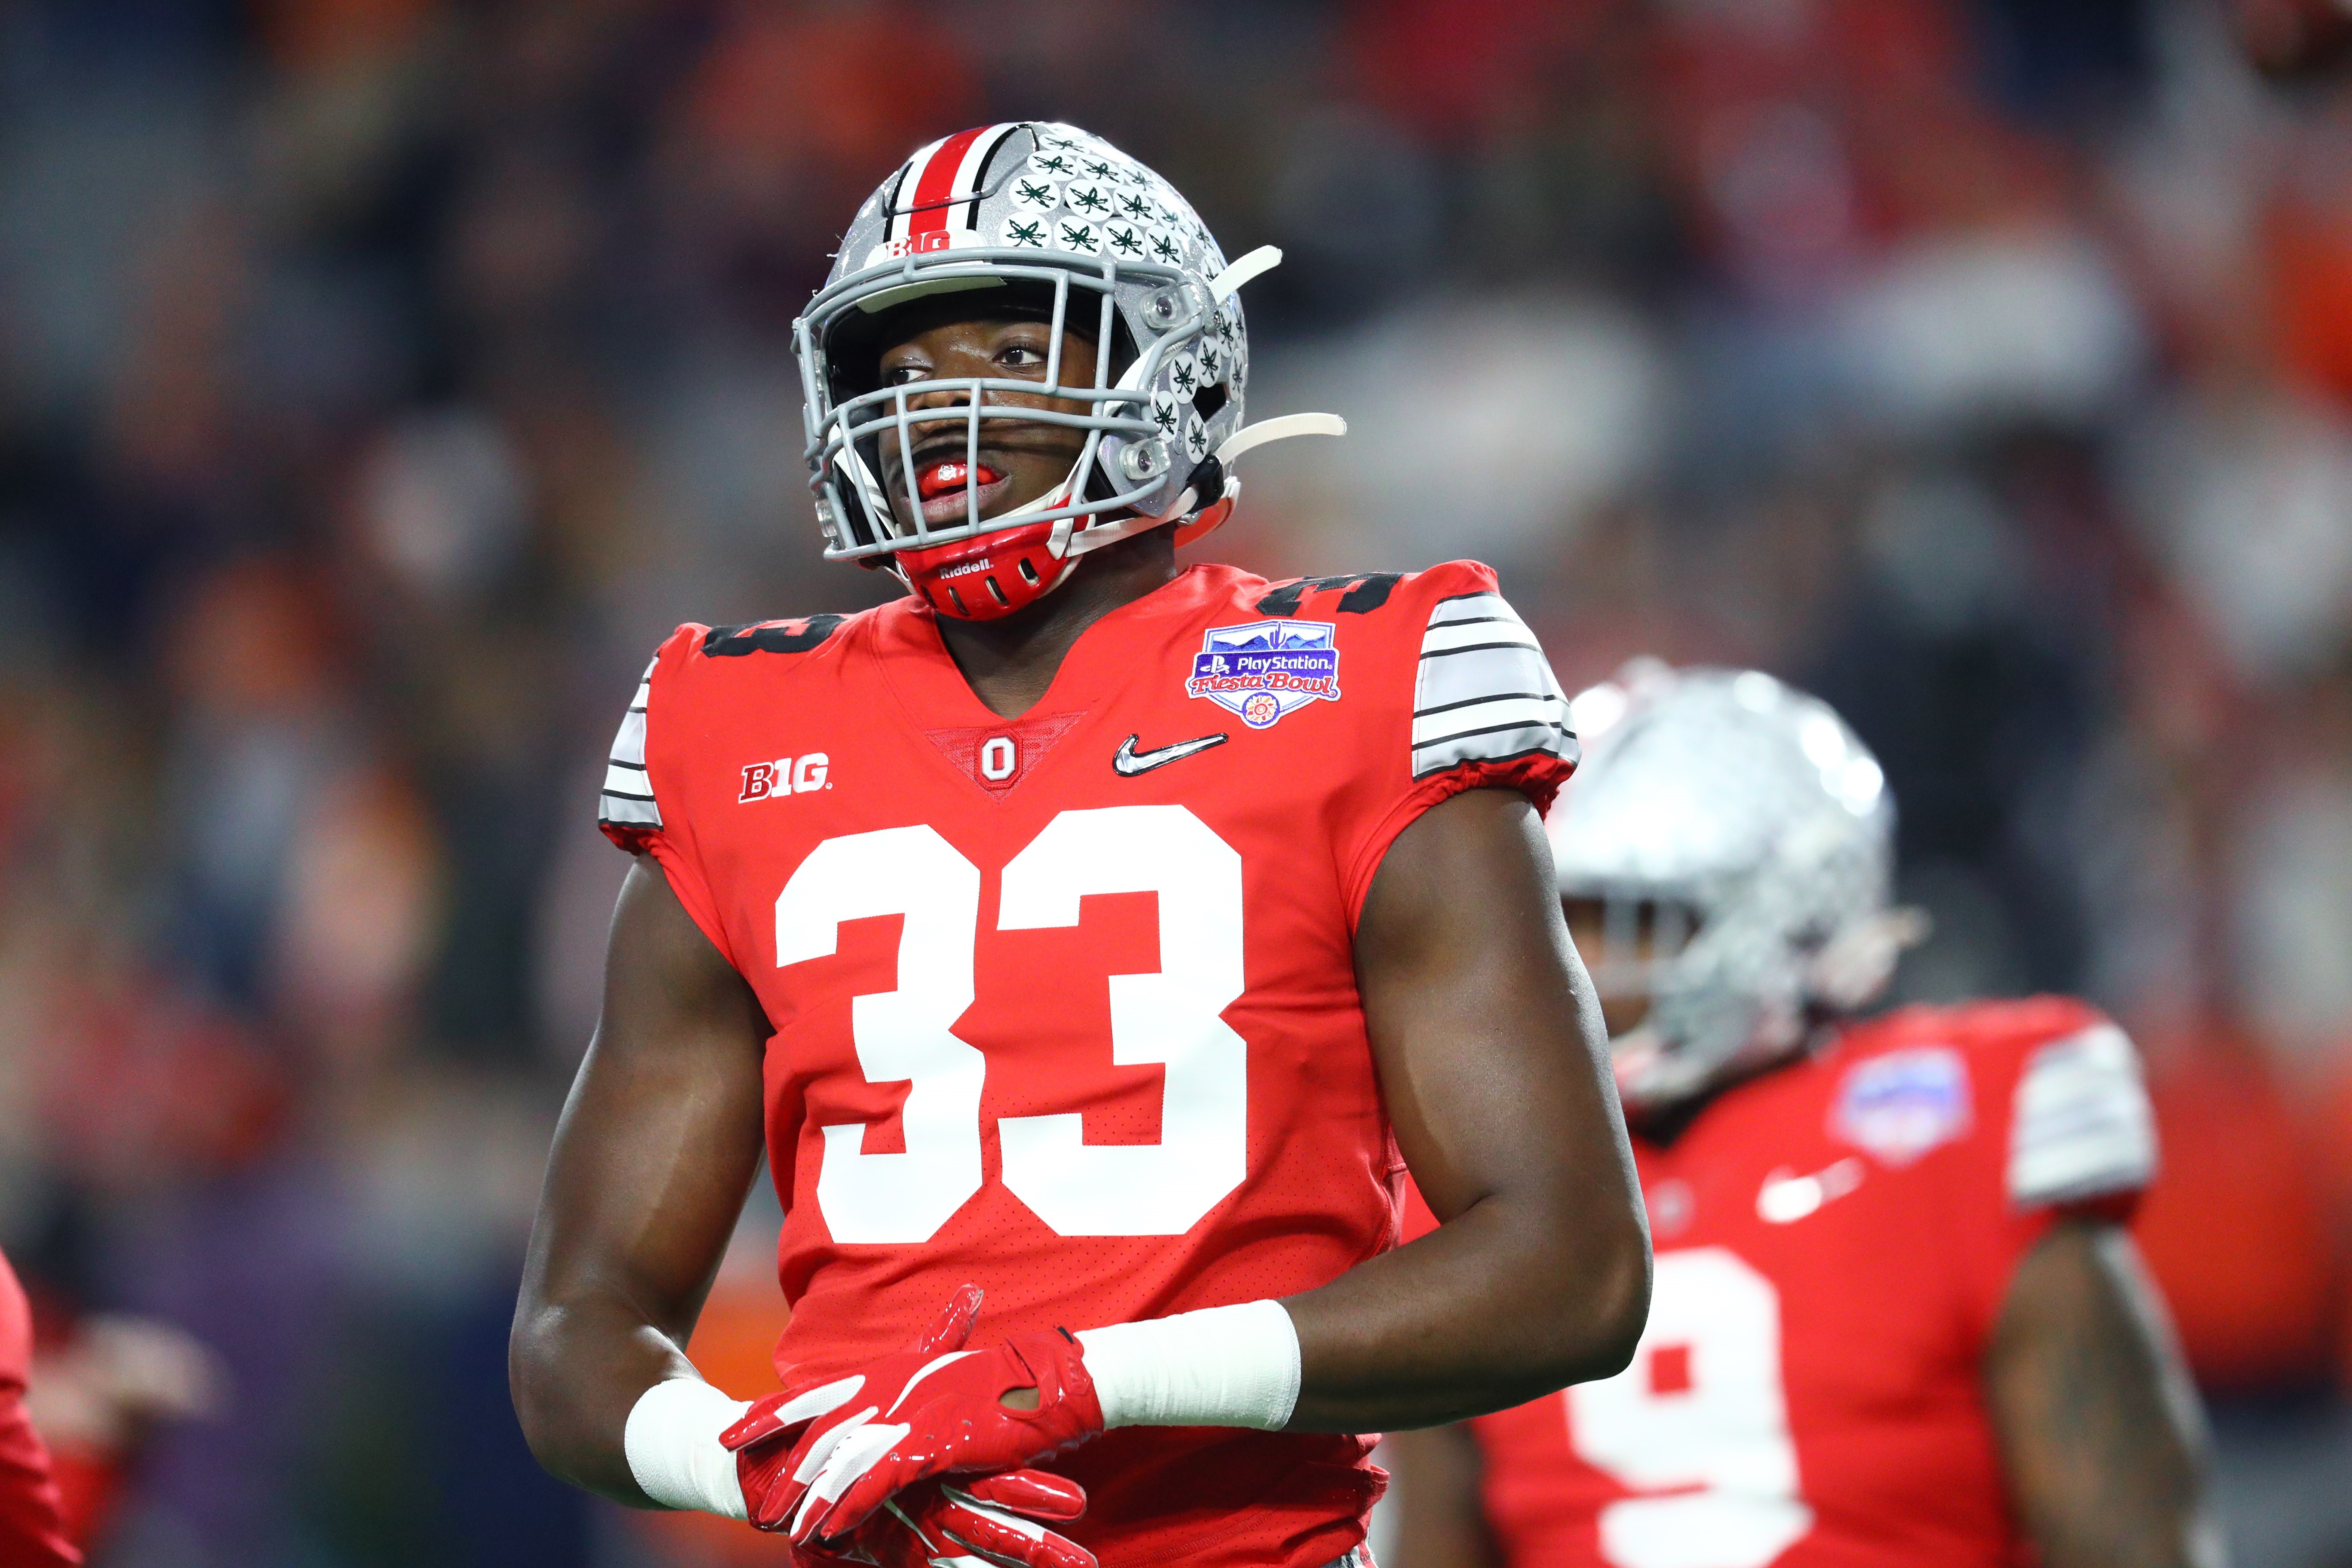 Ohio State football: Top ten players looking ahead to 2020